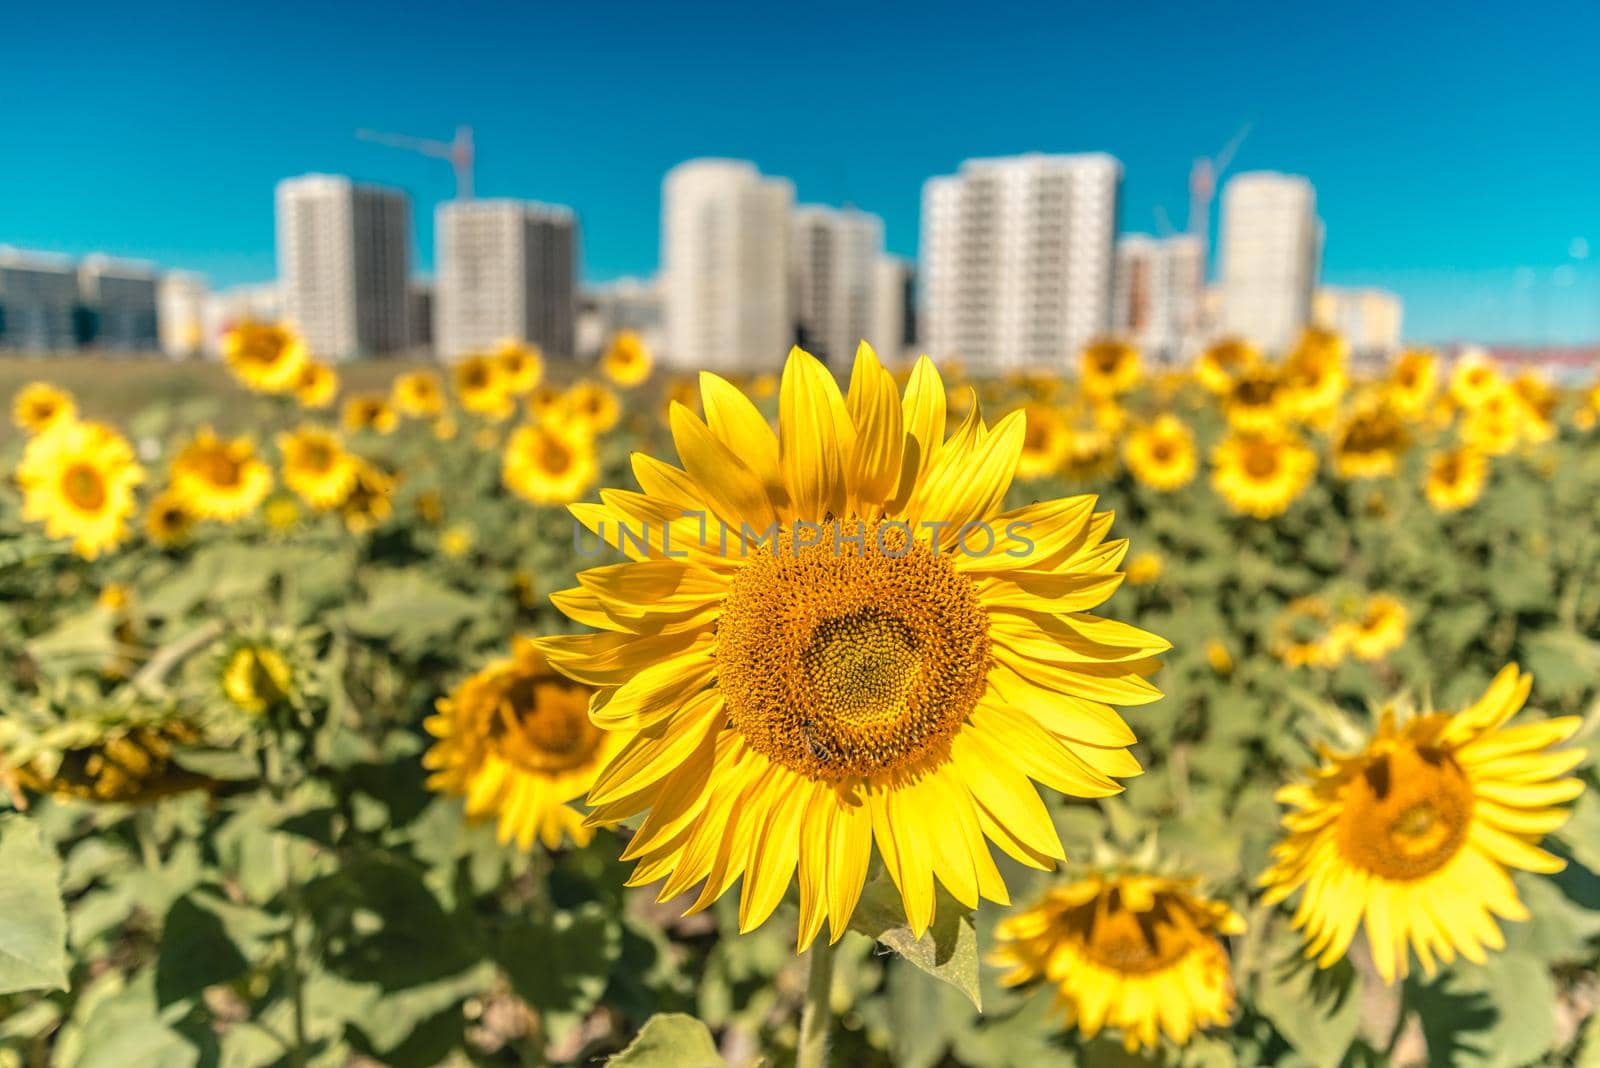 Gorgeous sunflowers on a background of new buildings and blue sky by Proff